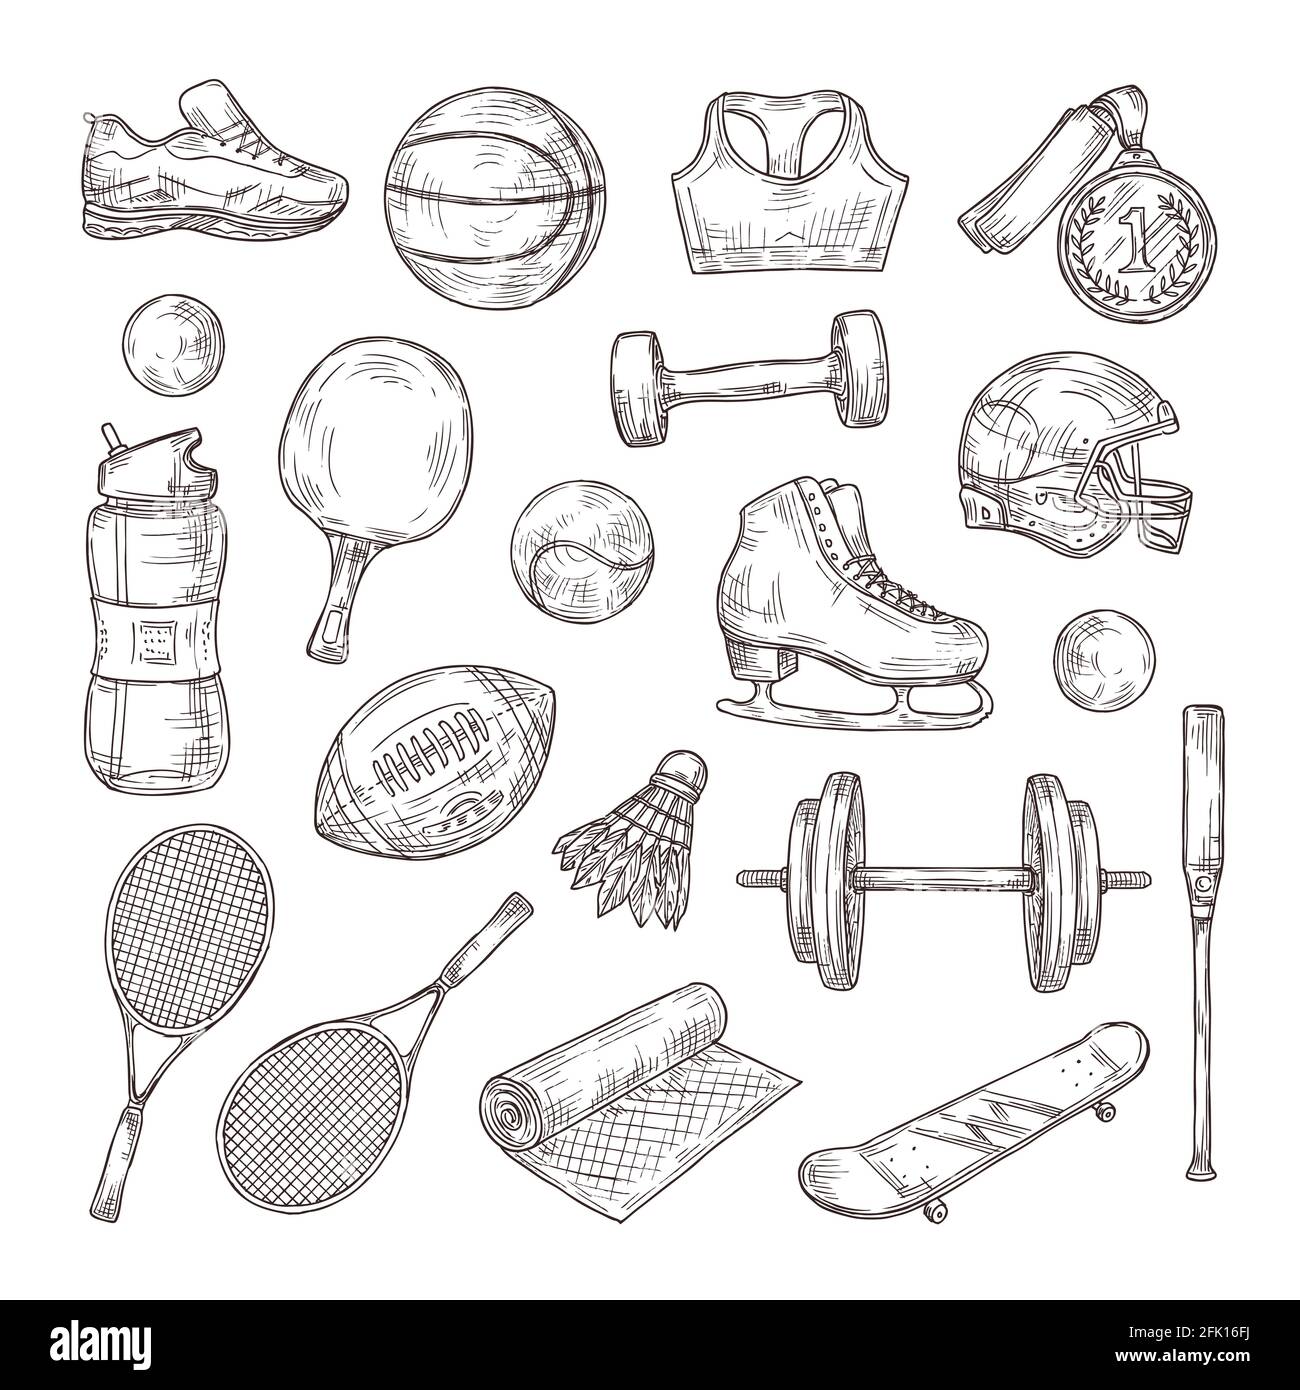 Basketball Equipment Accessories Top View Sports Stock Photo